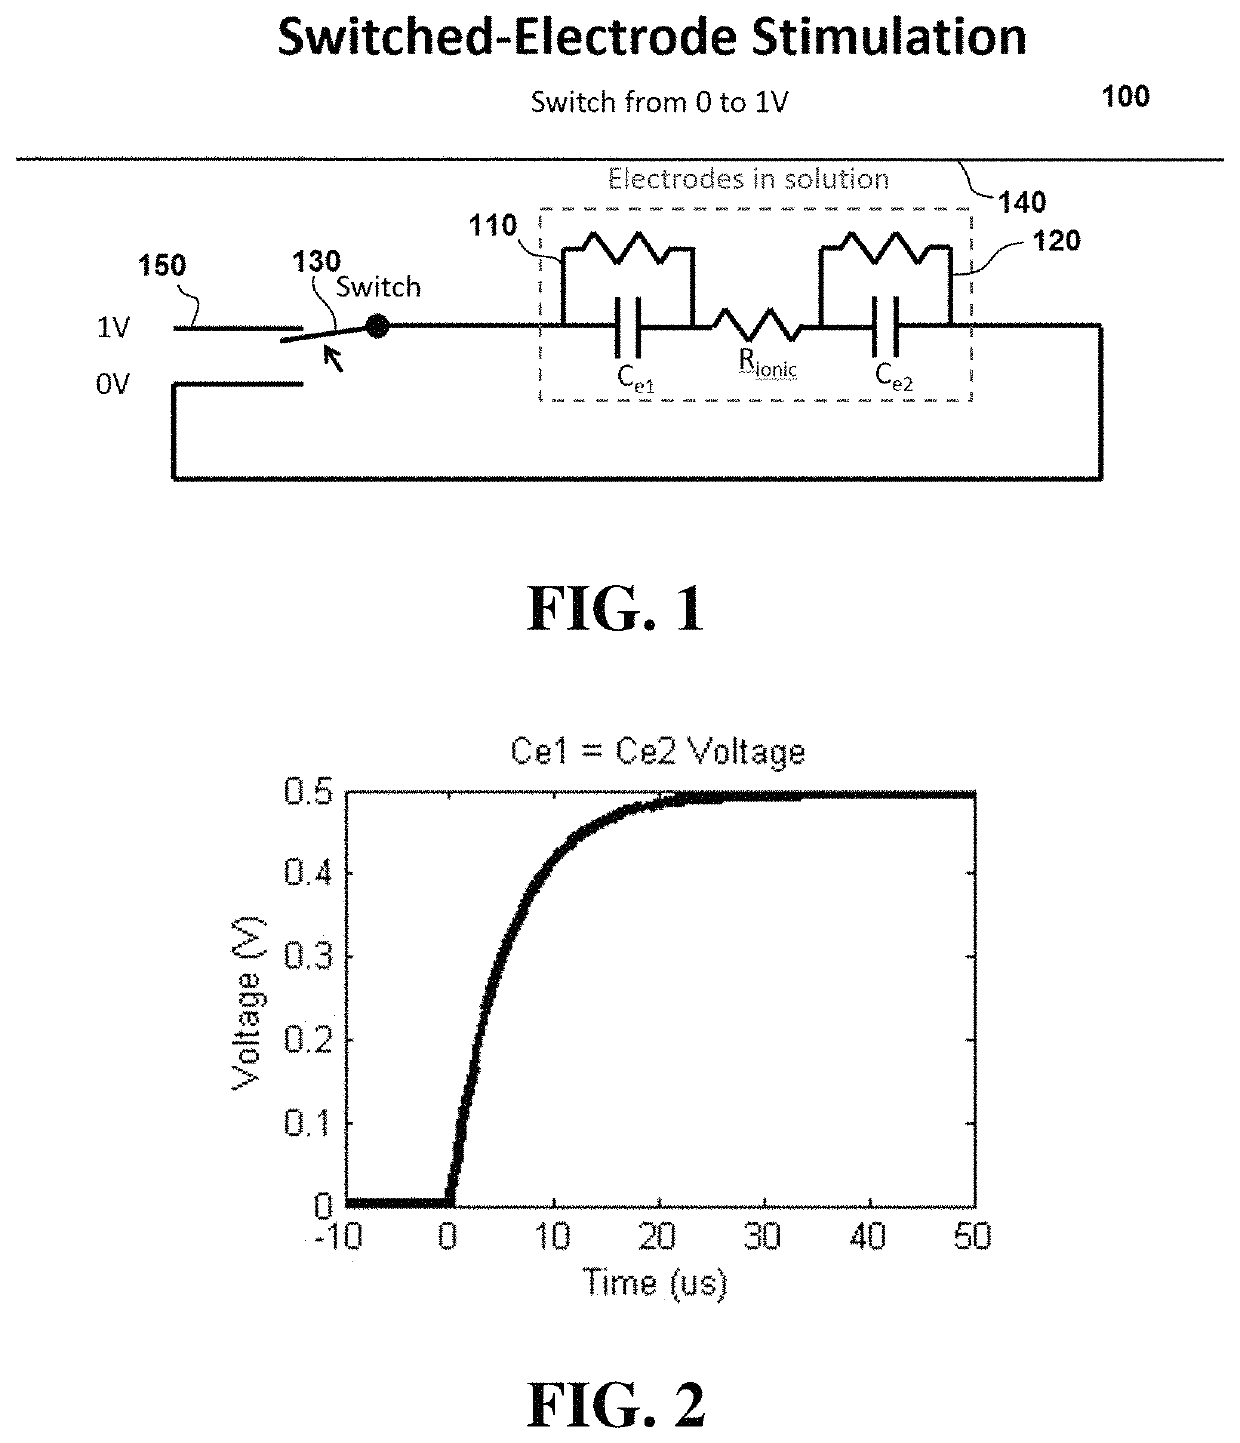 Systems and methods for switched electrode stimulation for low power bioelectronics